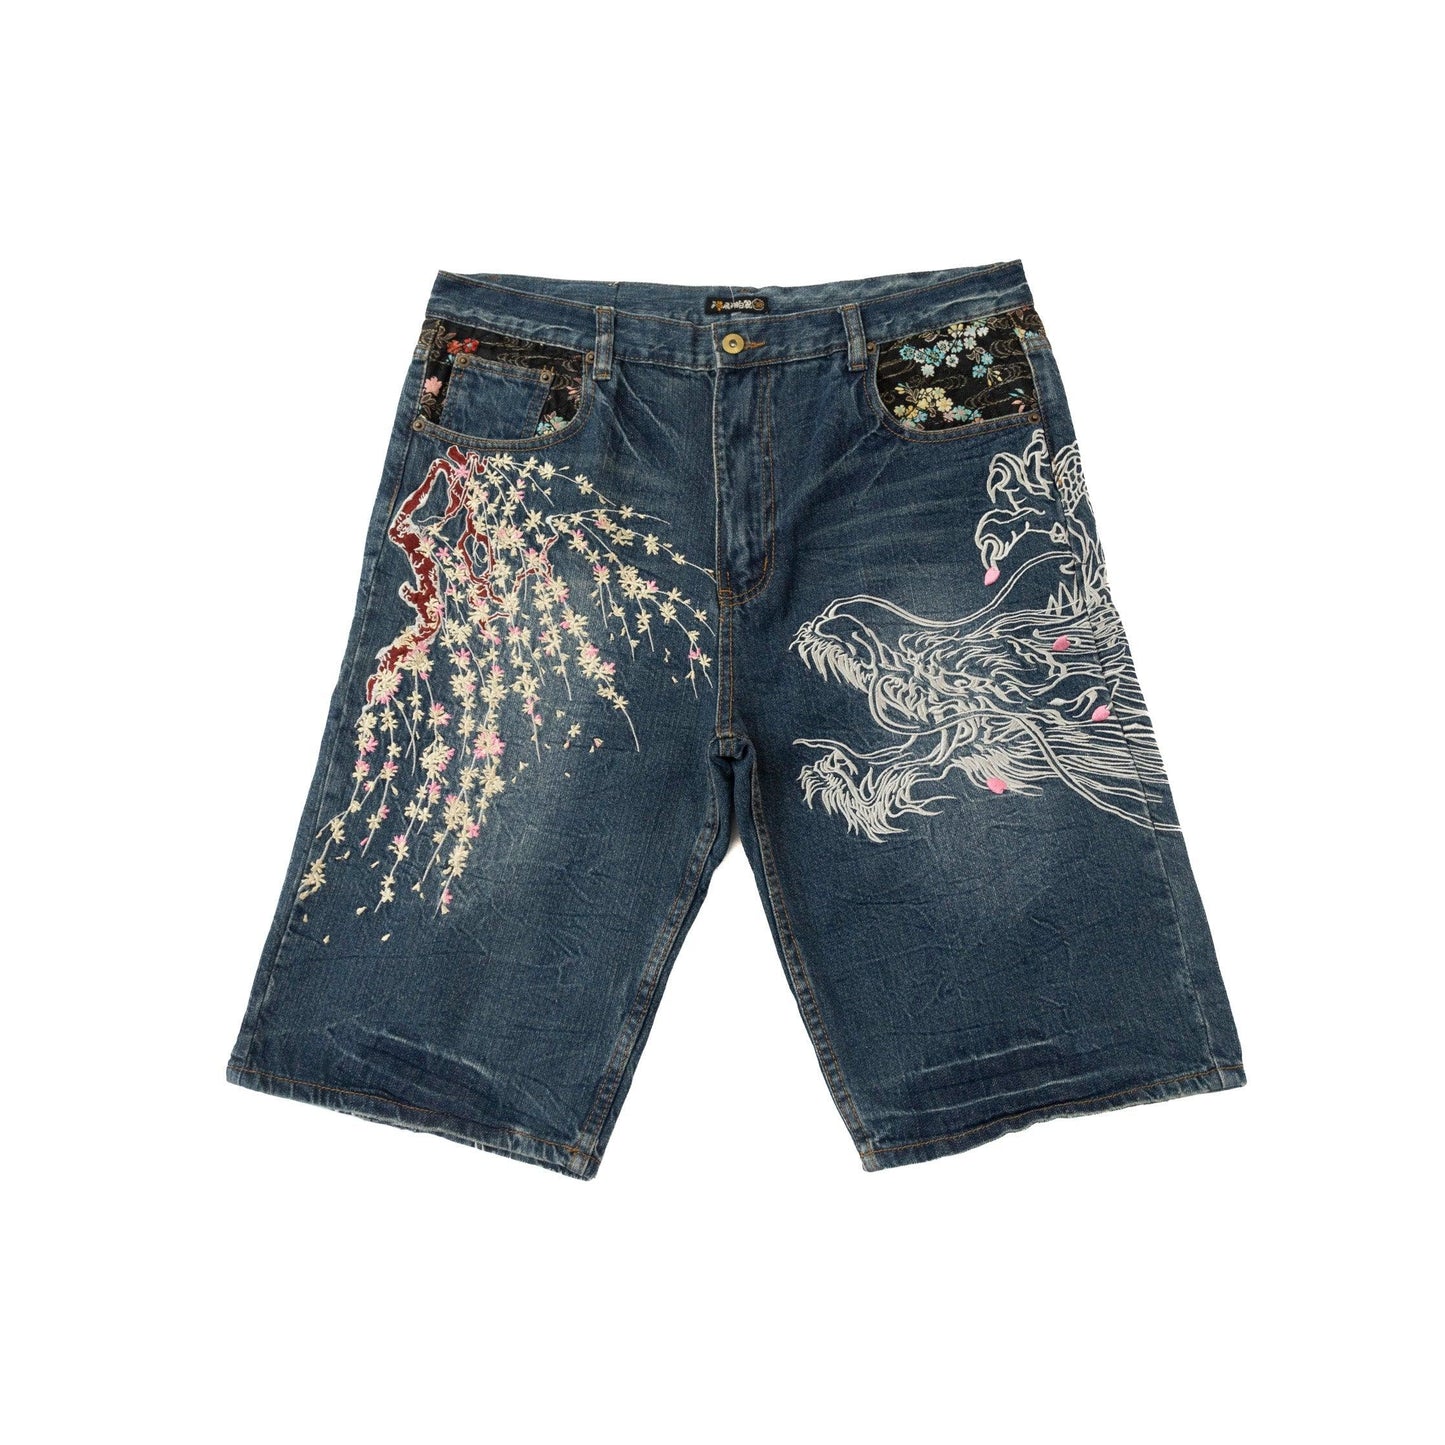 Hishyouhakurei Floral Embroidered Jorts - Known Source